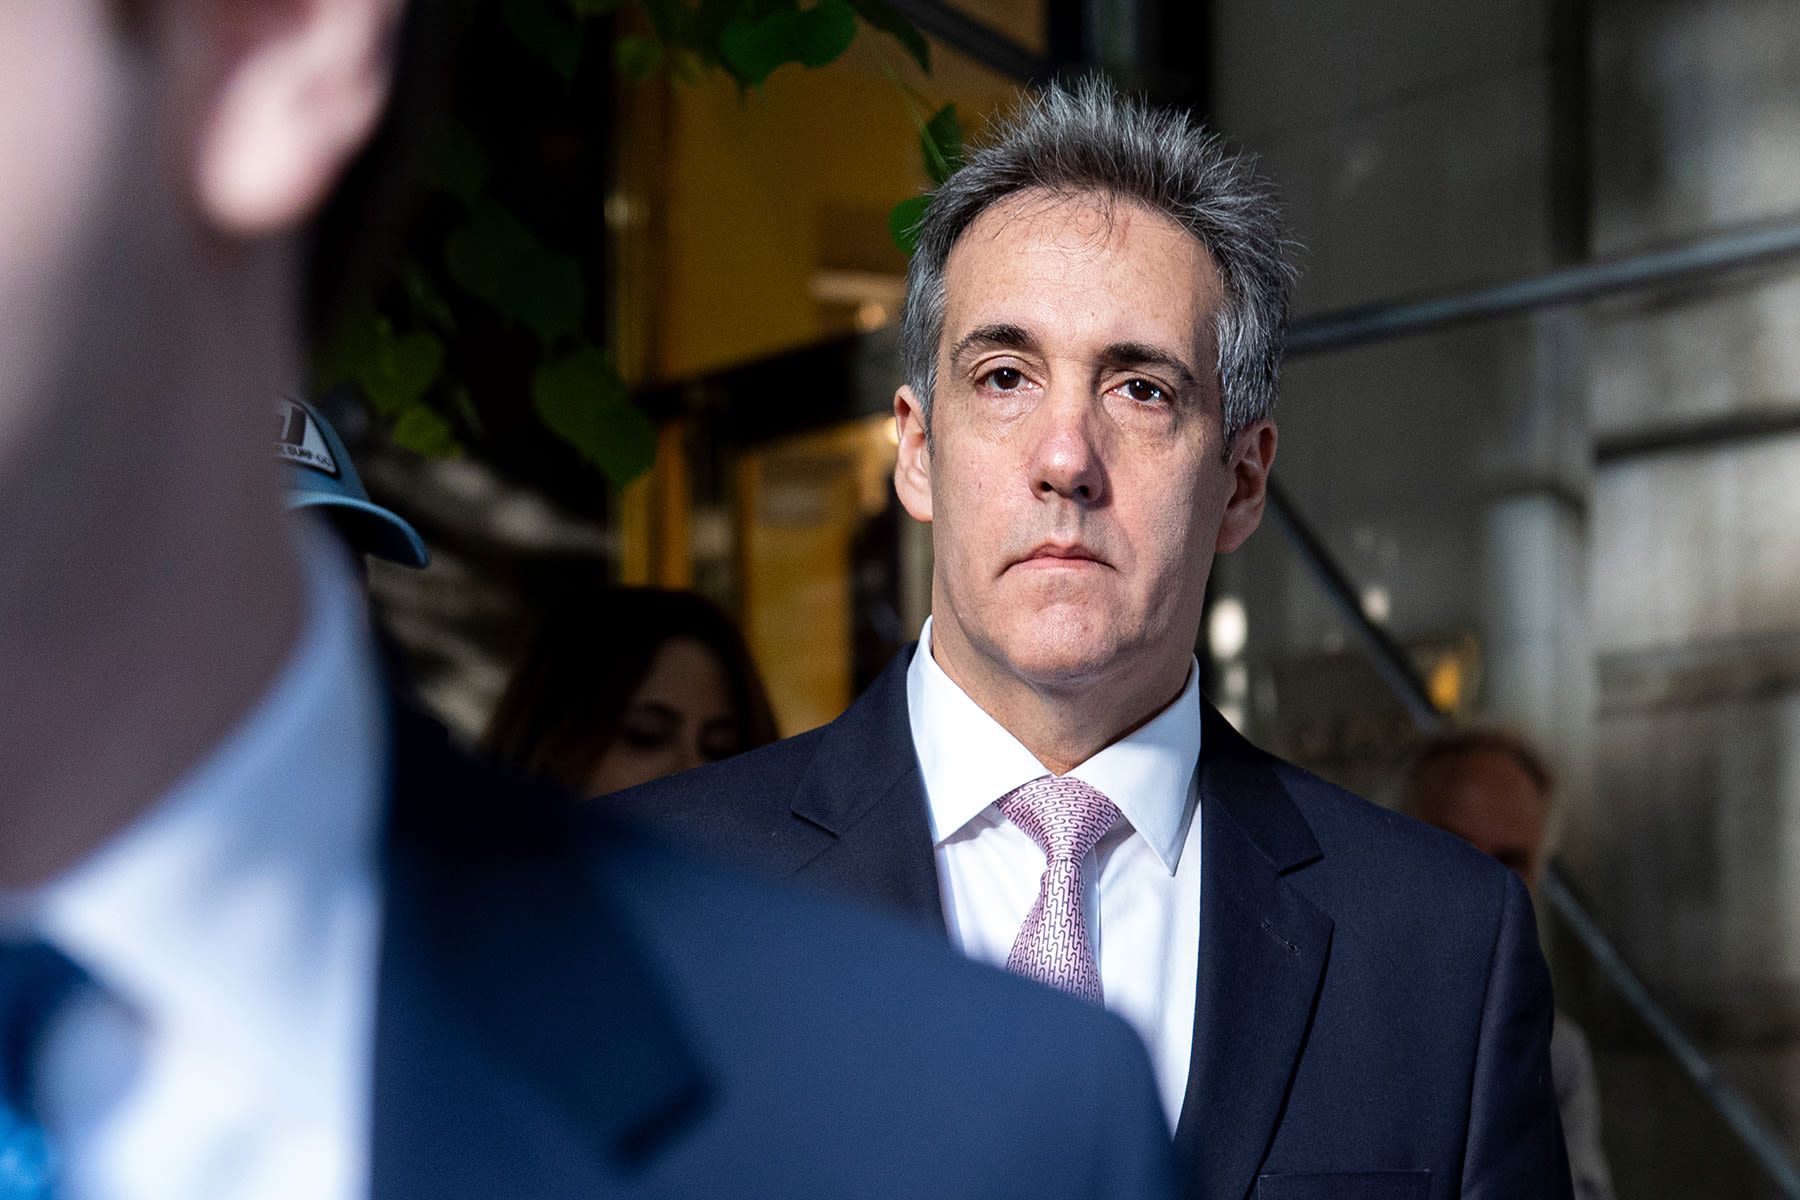 ‘Take Care of It’: Cohen Says Trump Told Him to Bury Stormy Daniels’ Story